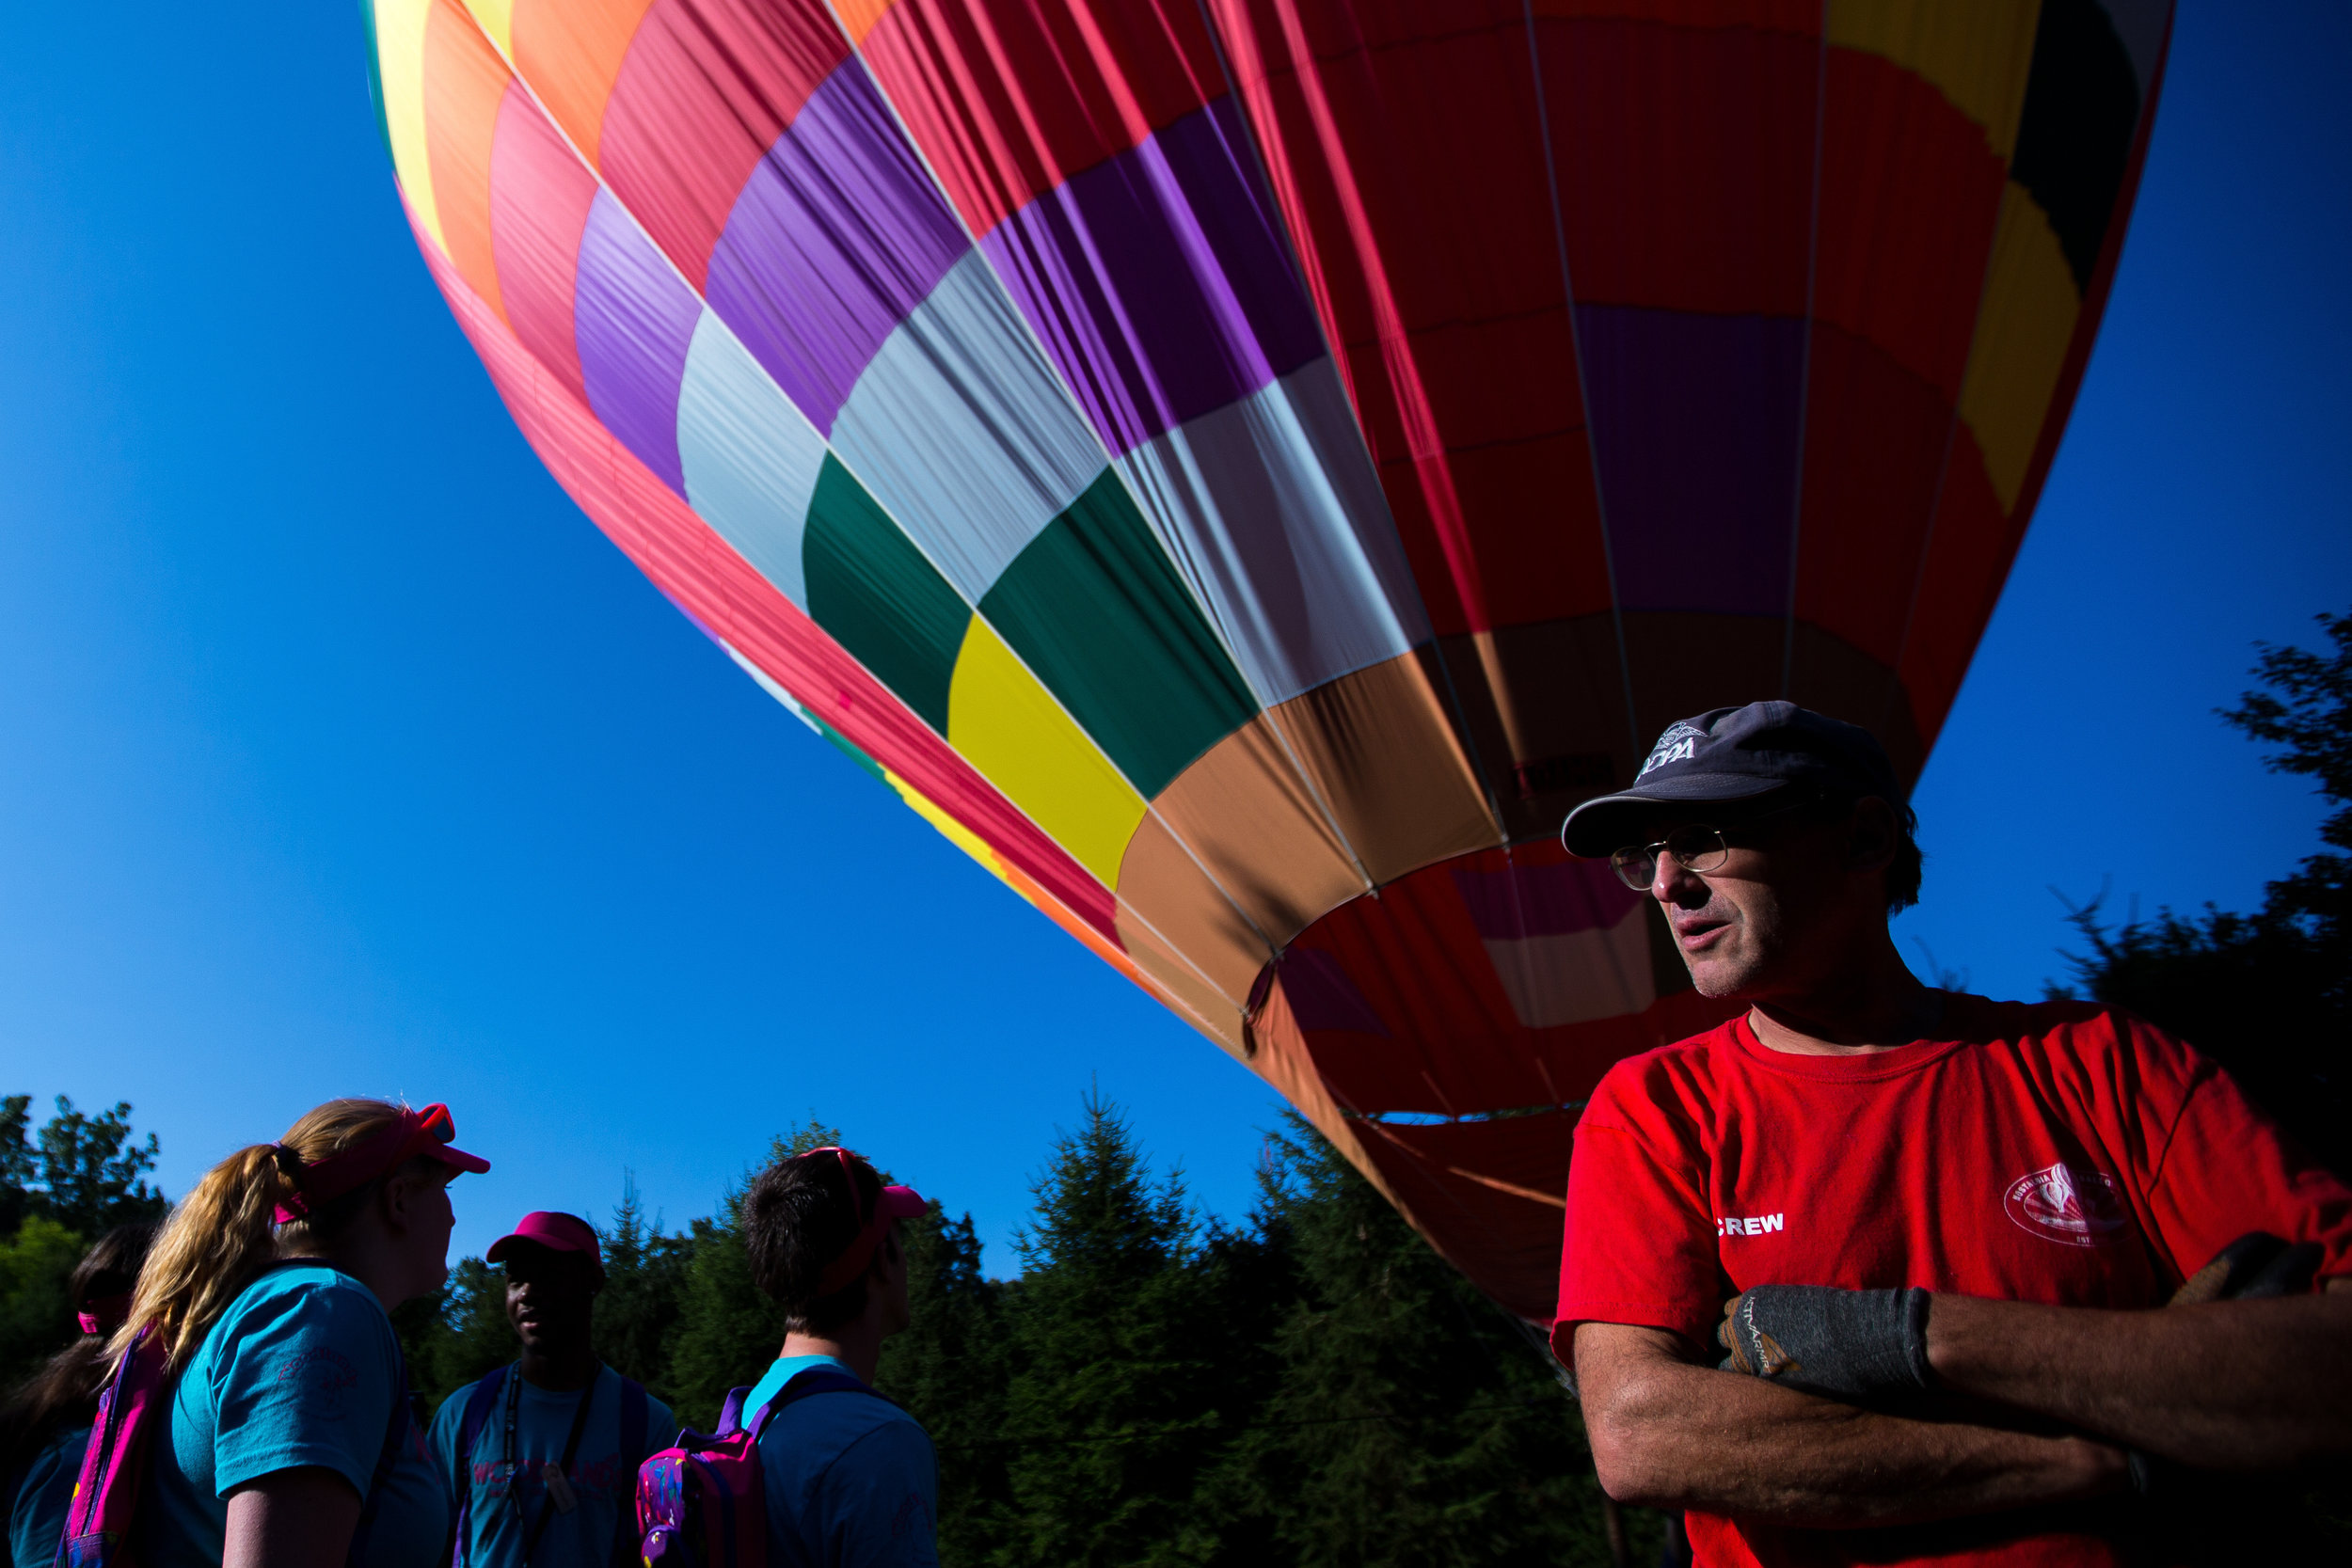  John Royer, of Nostalgia Ballooning from the Chicago area, watches and he and partner Chad Morin wait for steady winds so they can take kids from Camp Inspire on rides at the Woodlands Foundation on Tuesday morning. Nostalgia Ballooning drove to Wex